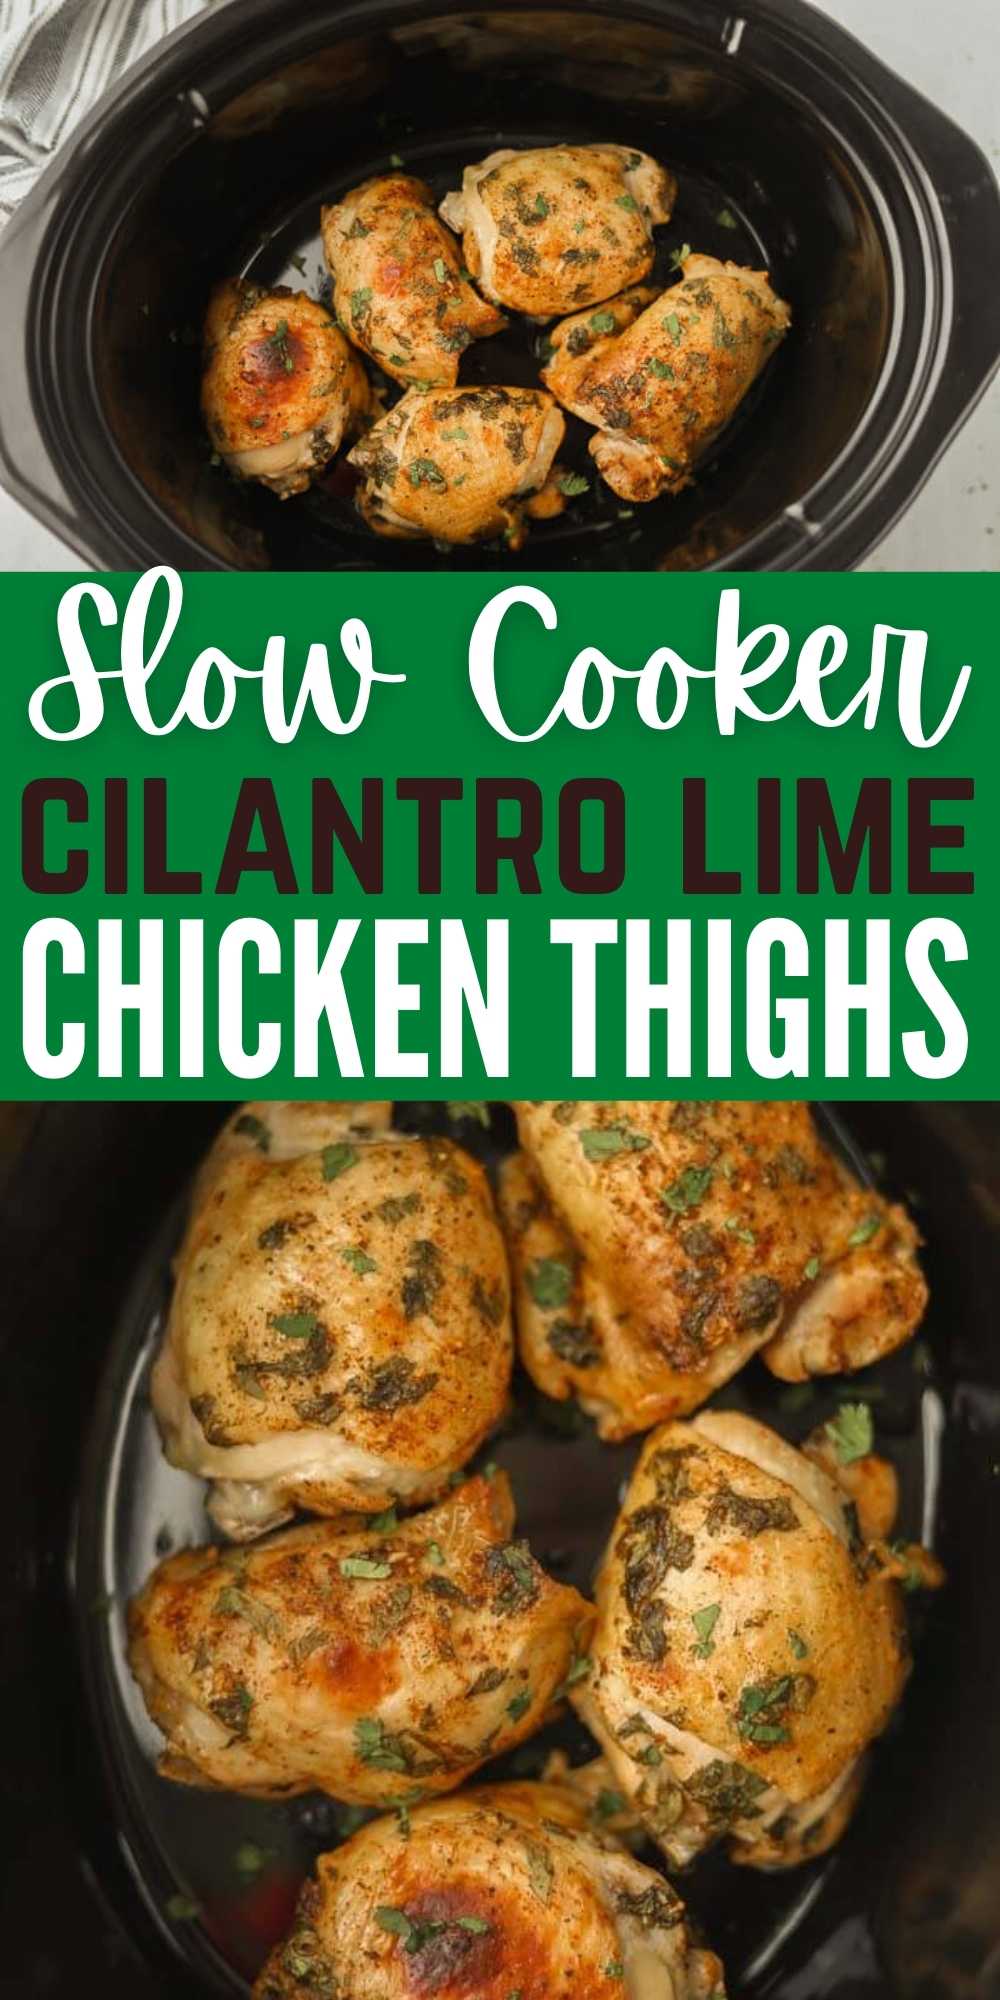 The crock pot makes Cilantro Lime Chicken Thighs tender and amazing. Slow Cooker Cilantro Lime Chicken Thighs Recipe is packed with lime flavor and easy to make. This crockpot cilantro lime chicken thighs are crispy and easy to make too! #eatingonadime #chickenrecipes #crockpotrecipes #slowcookerrecipes 
